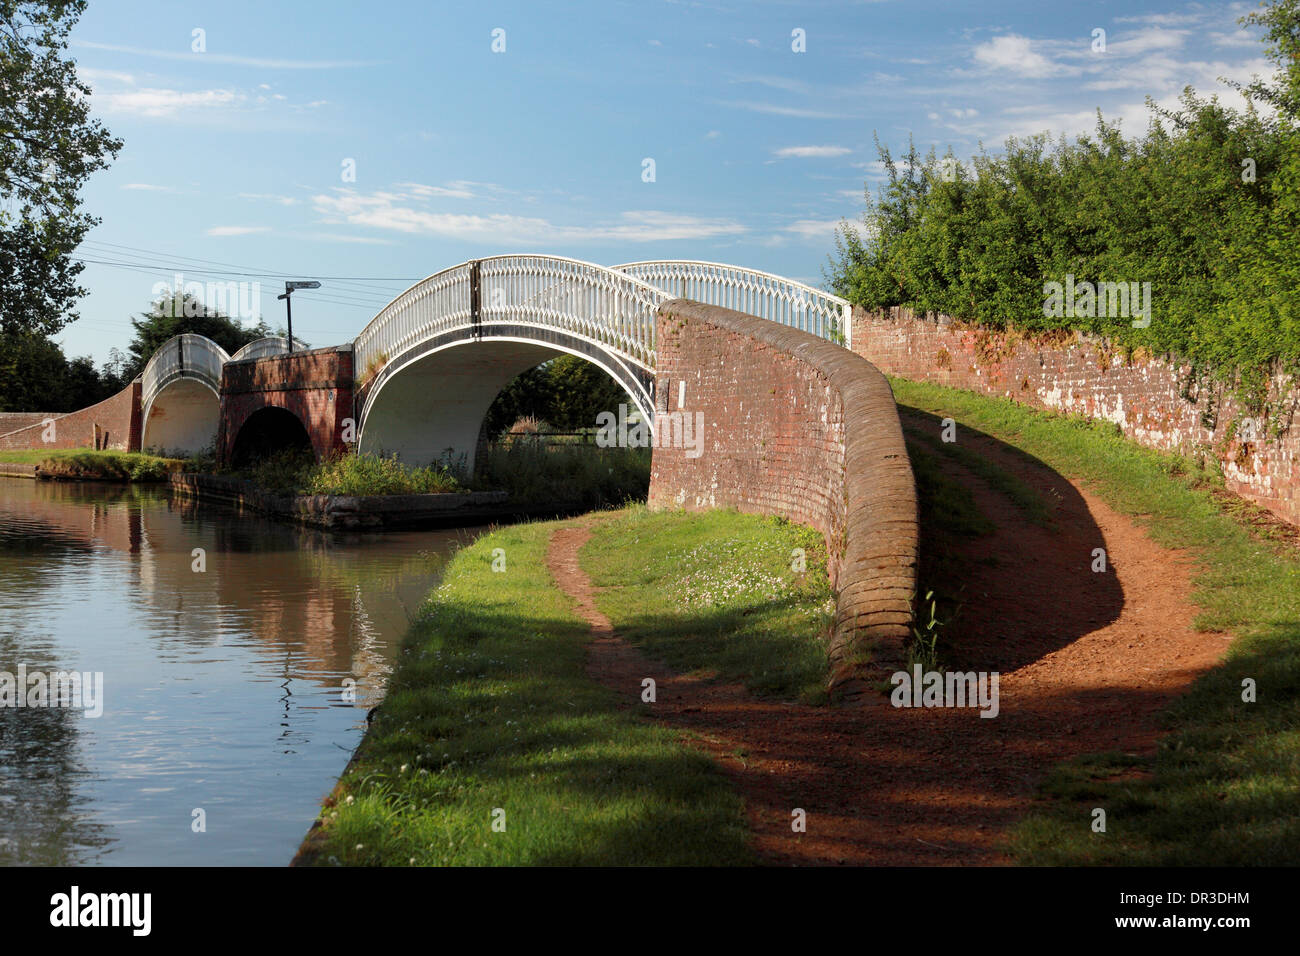 The elegant double iron bridges at Braunston Turn where the Oxford Canal on the right meets the Grand Union Canal on the far lef Stock Photo